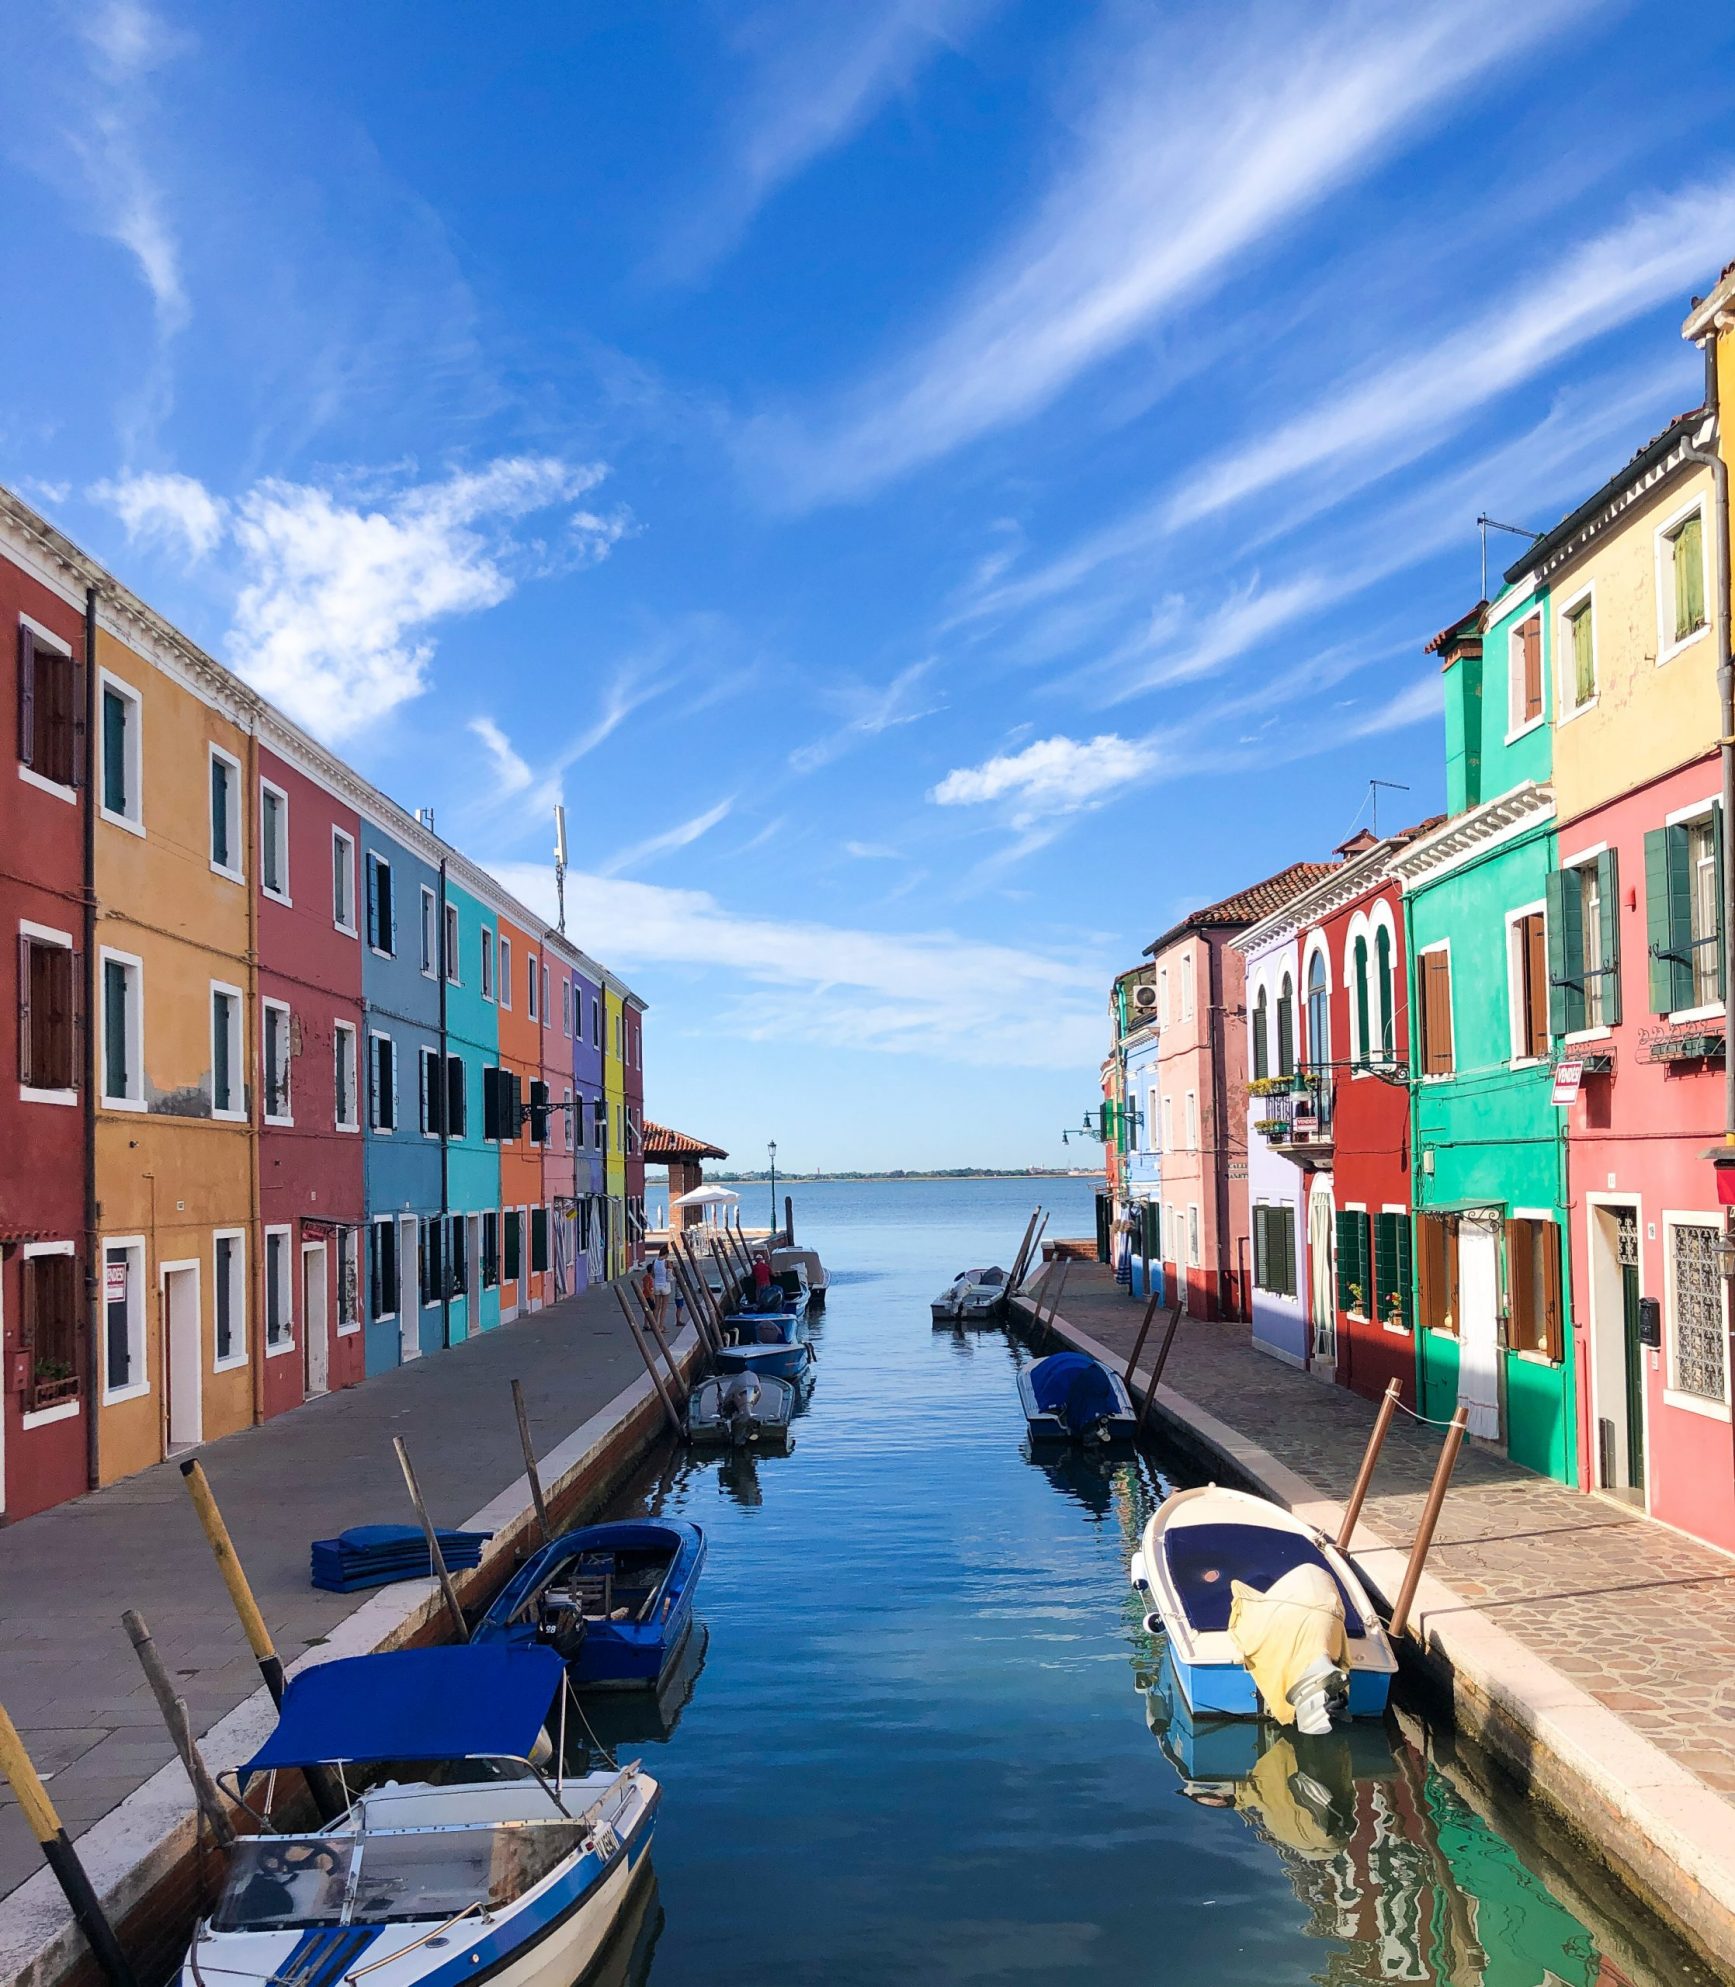 The colorful houses of Burano island - Venice